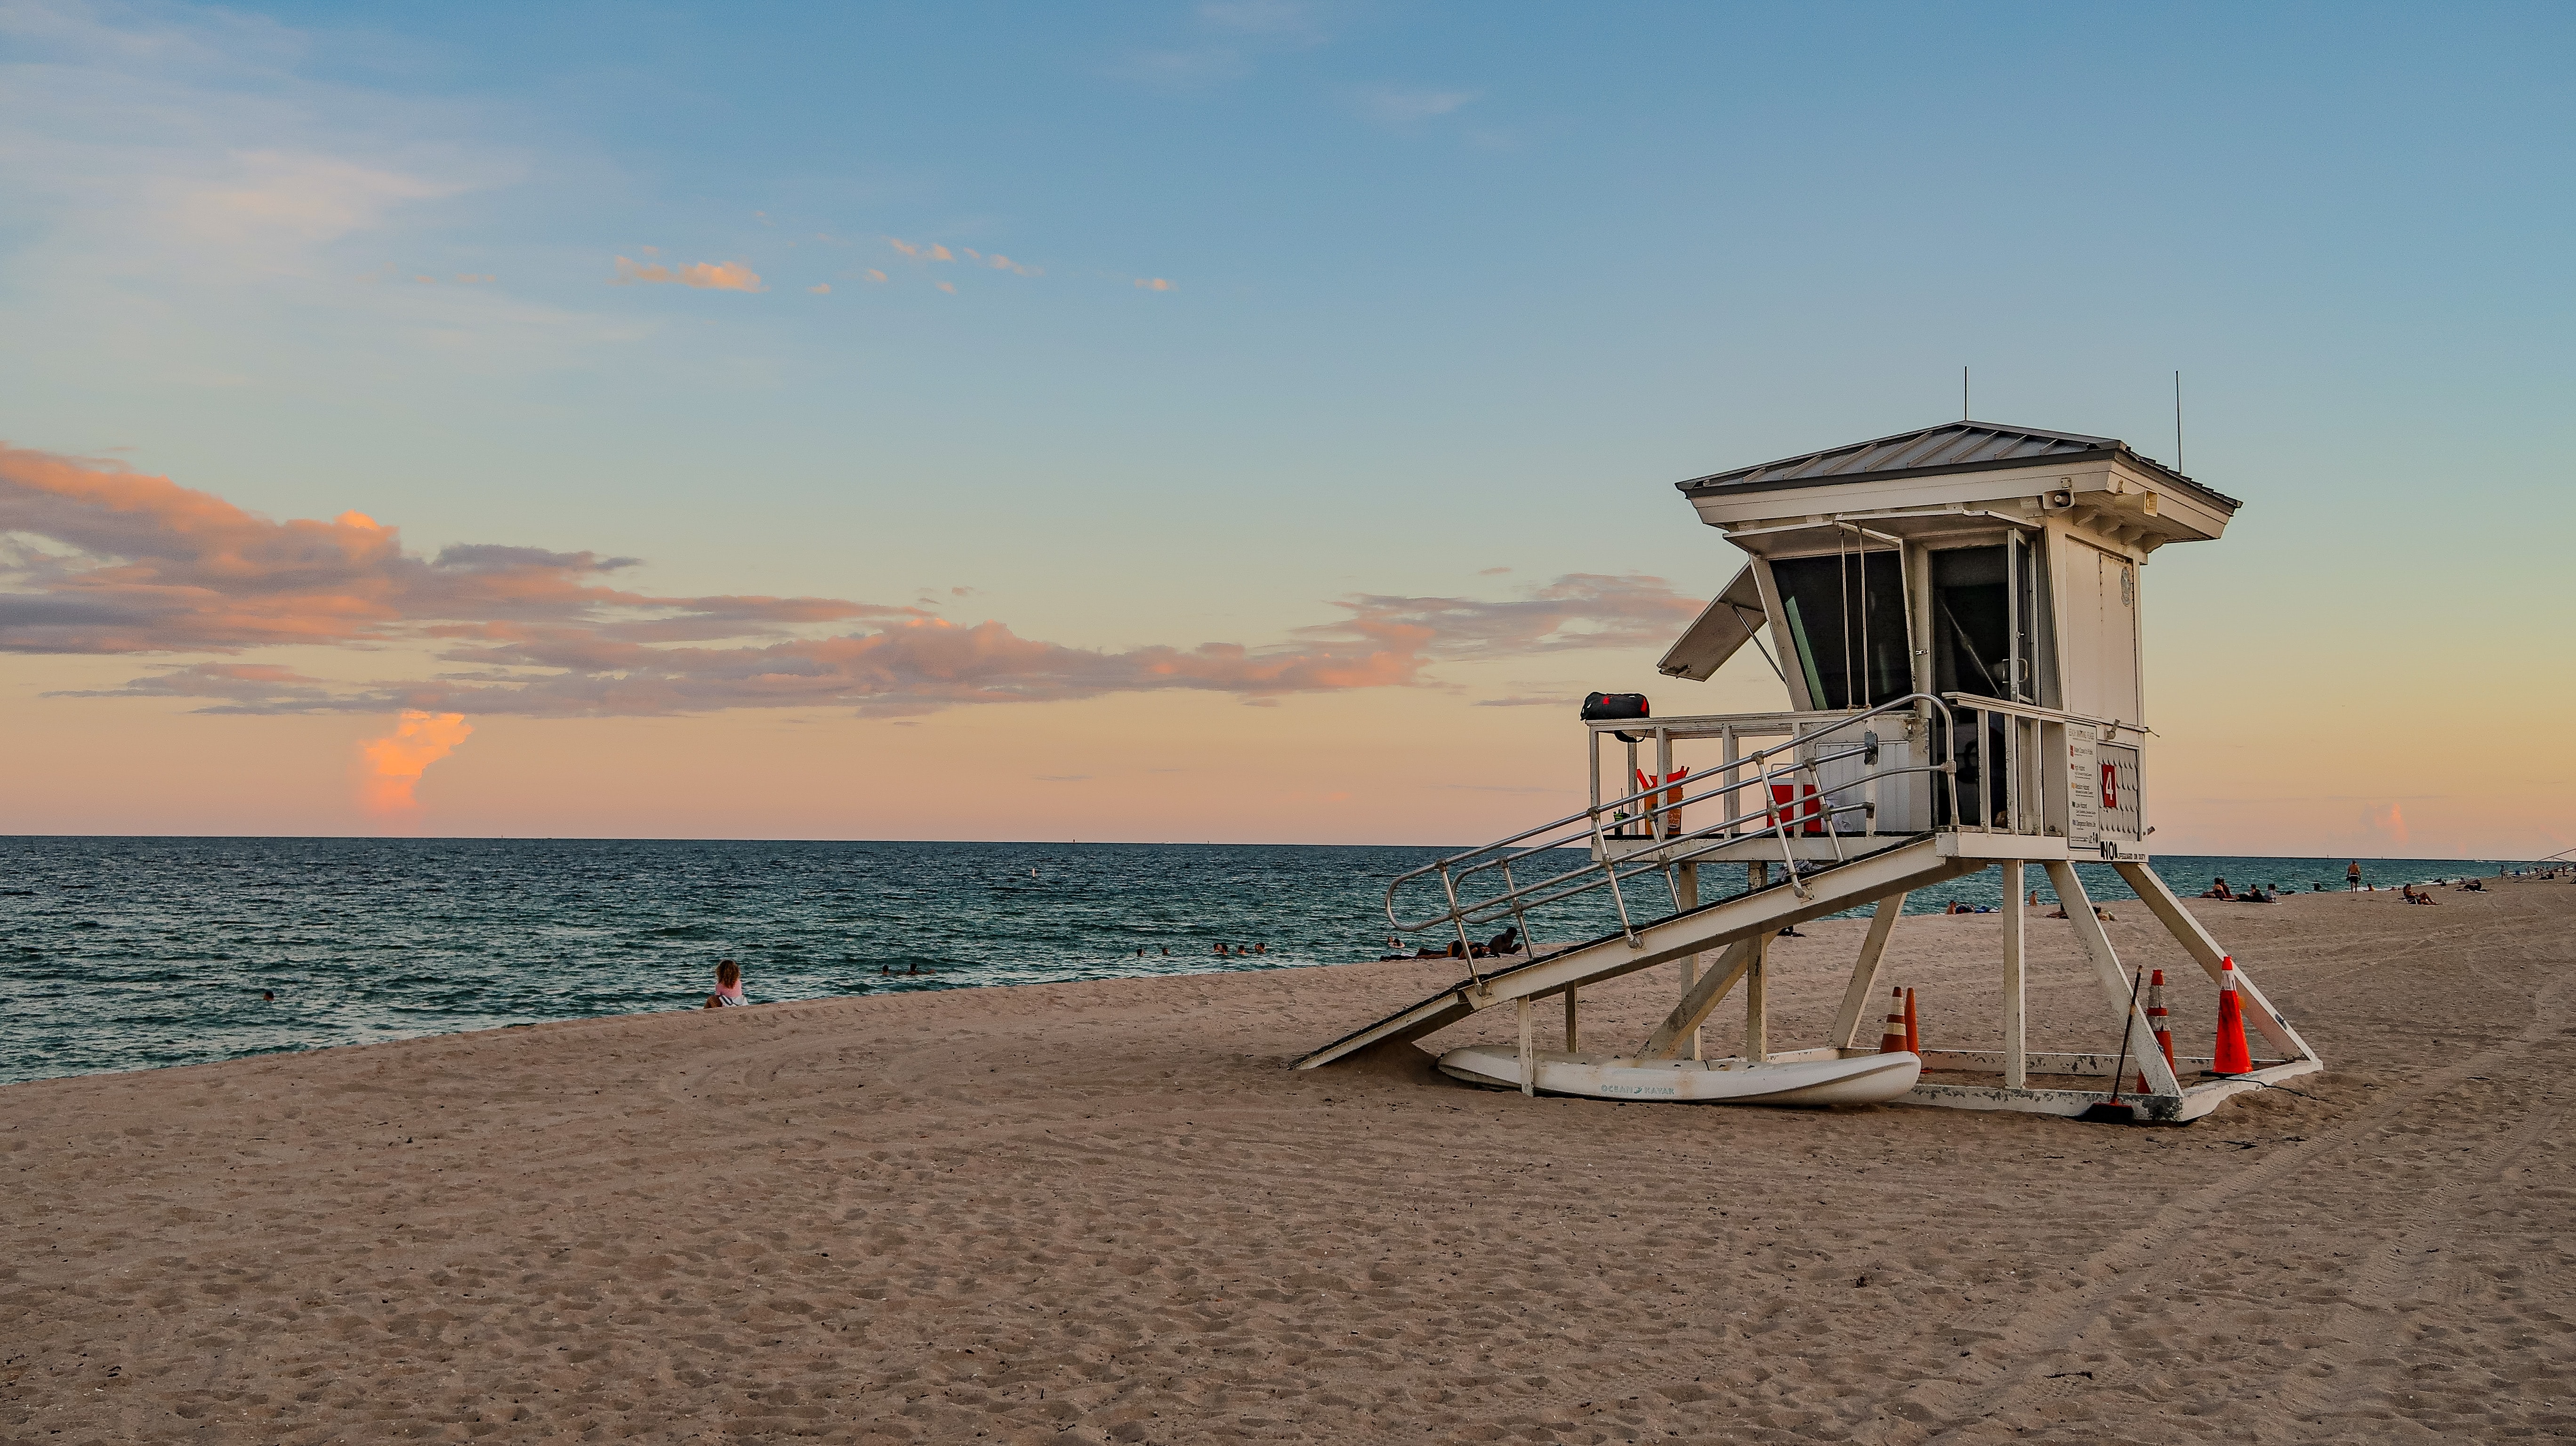 Best Beaches in Fort Lauderdale, Florida - Top 10 Beaches in Fort Lauderdale